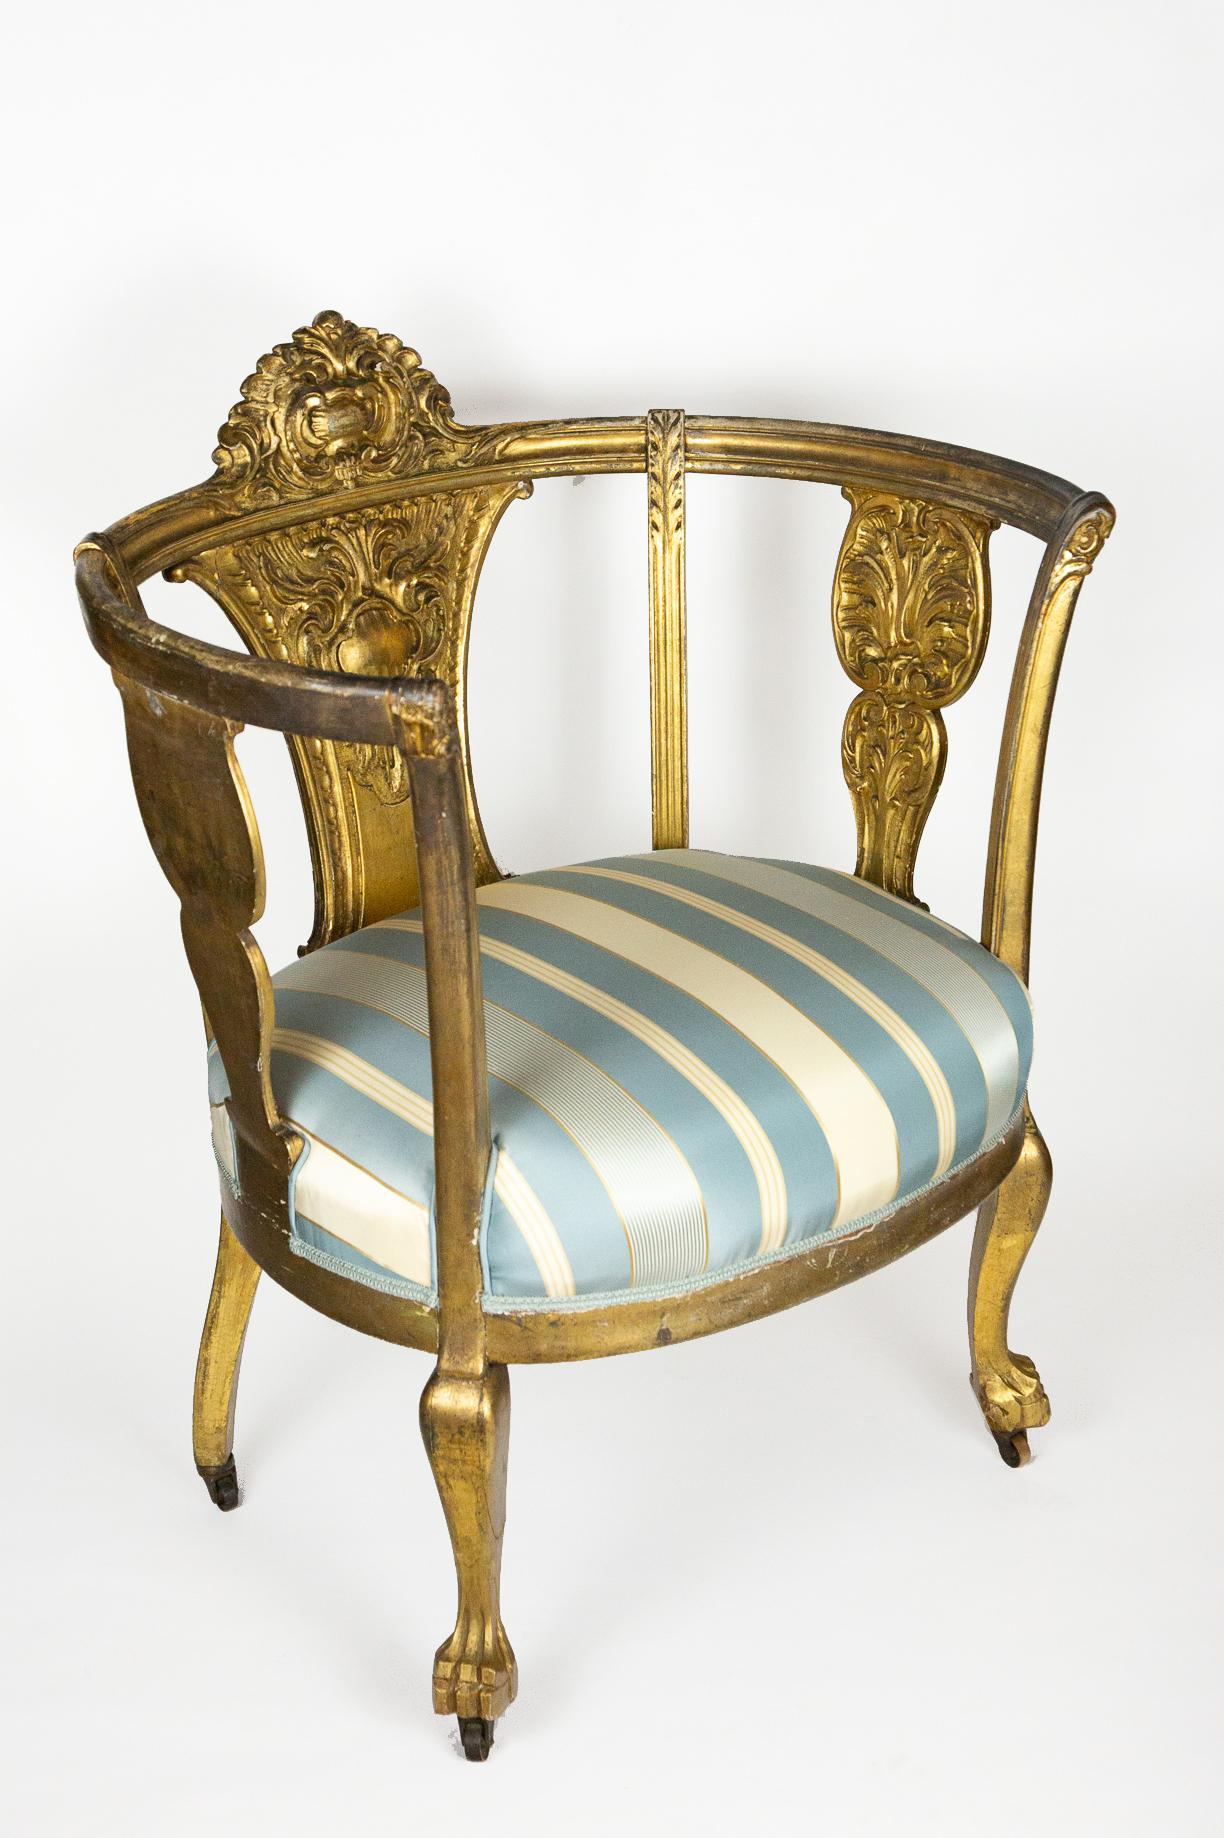 Late 19th Century Gustavian Style Gilt Settee and Matching Chair For Sale 2